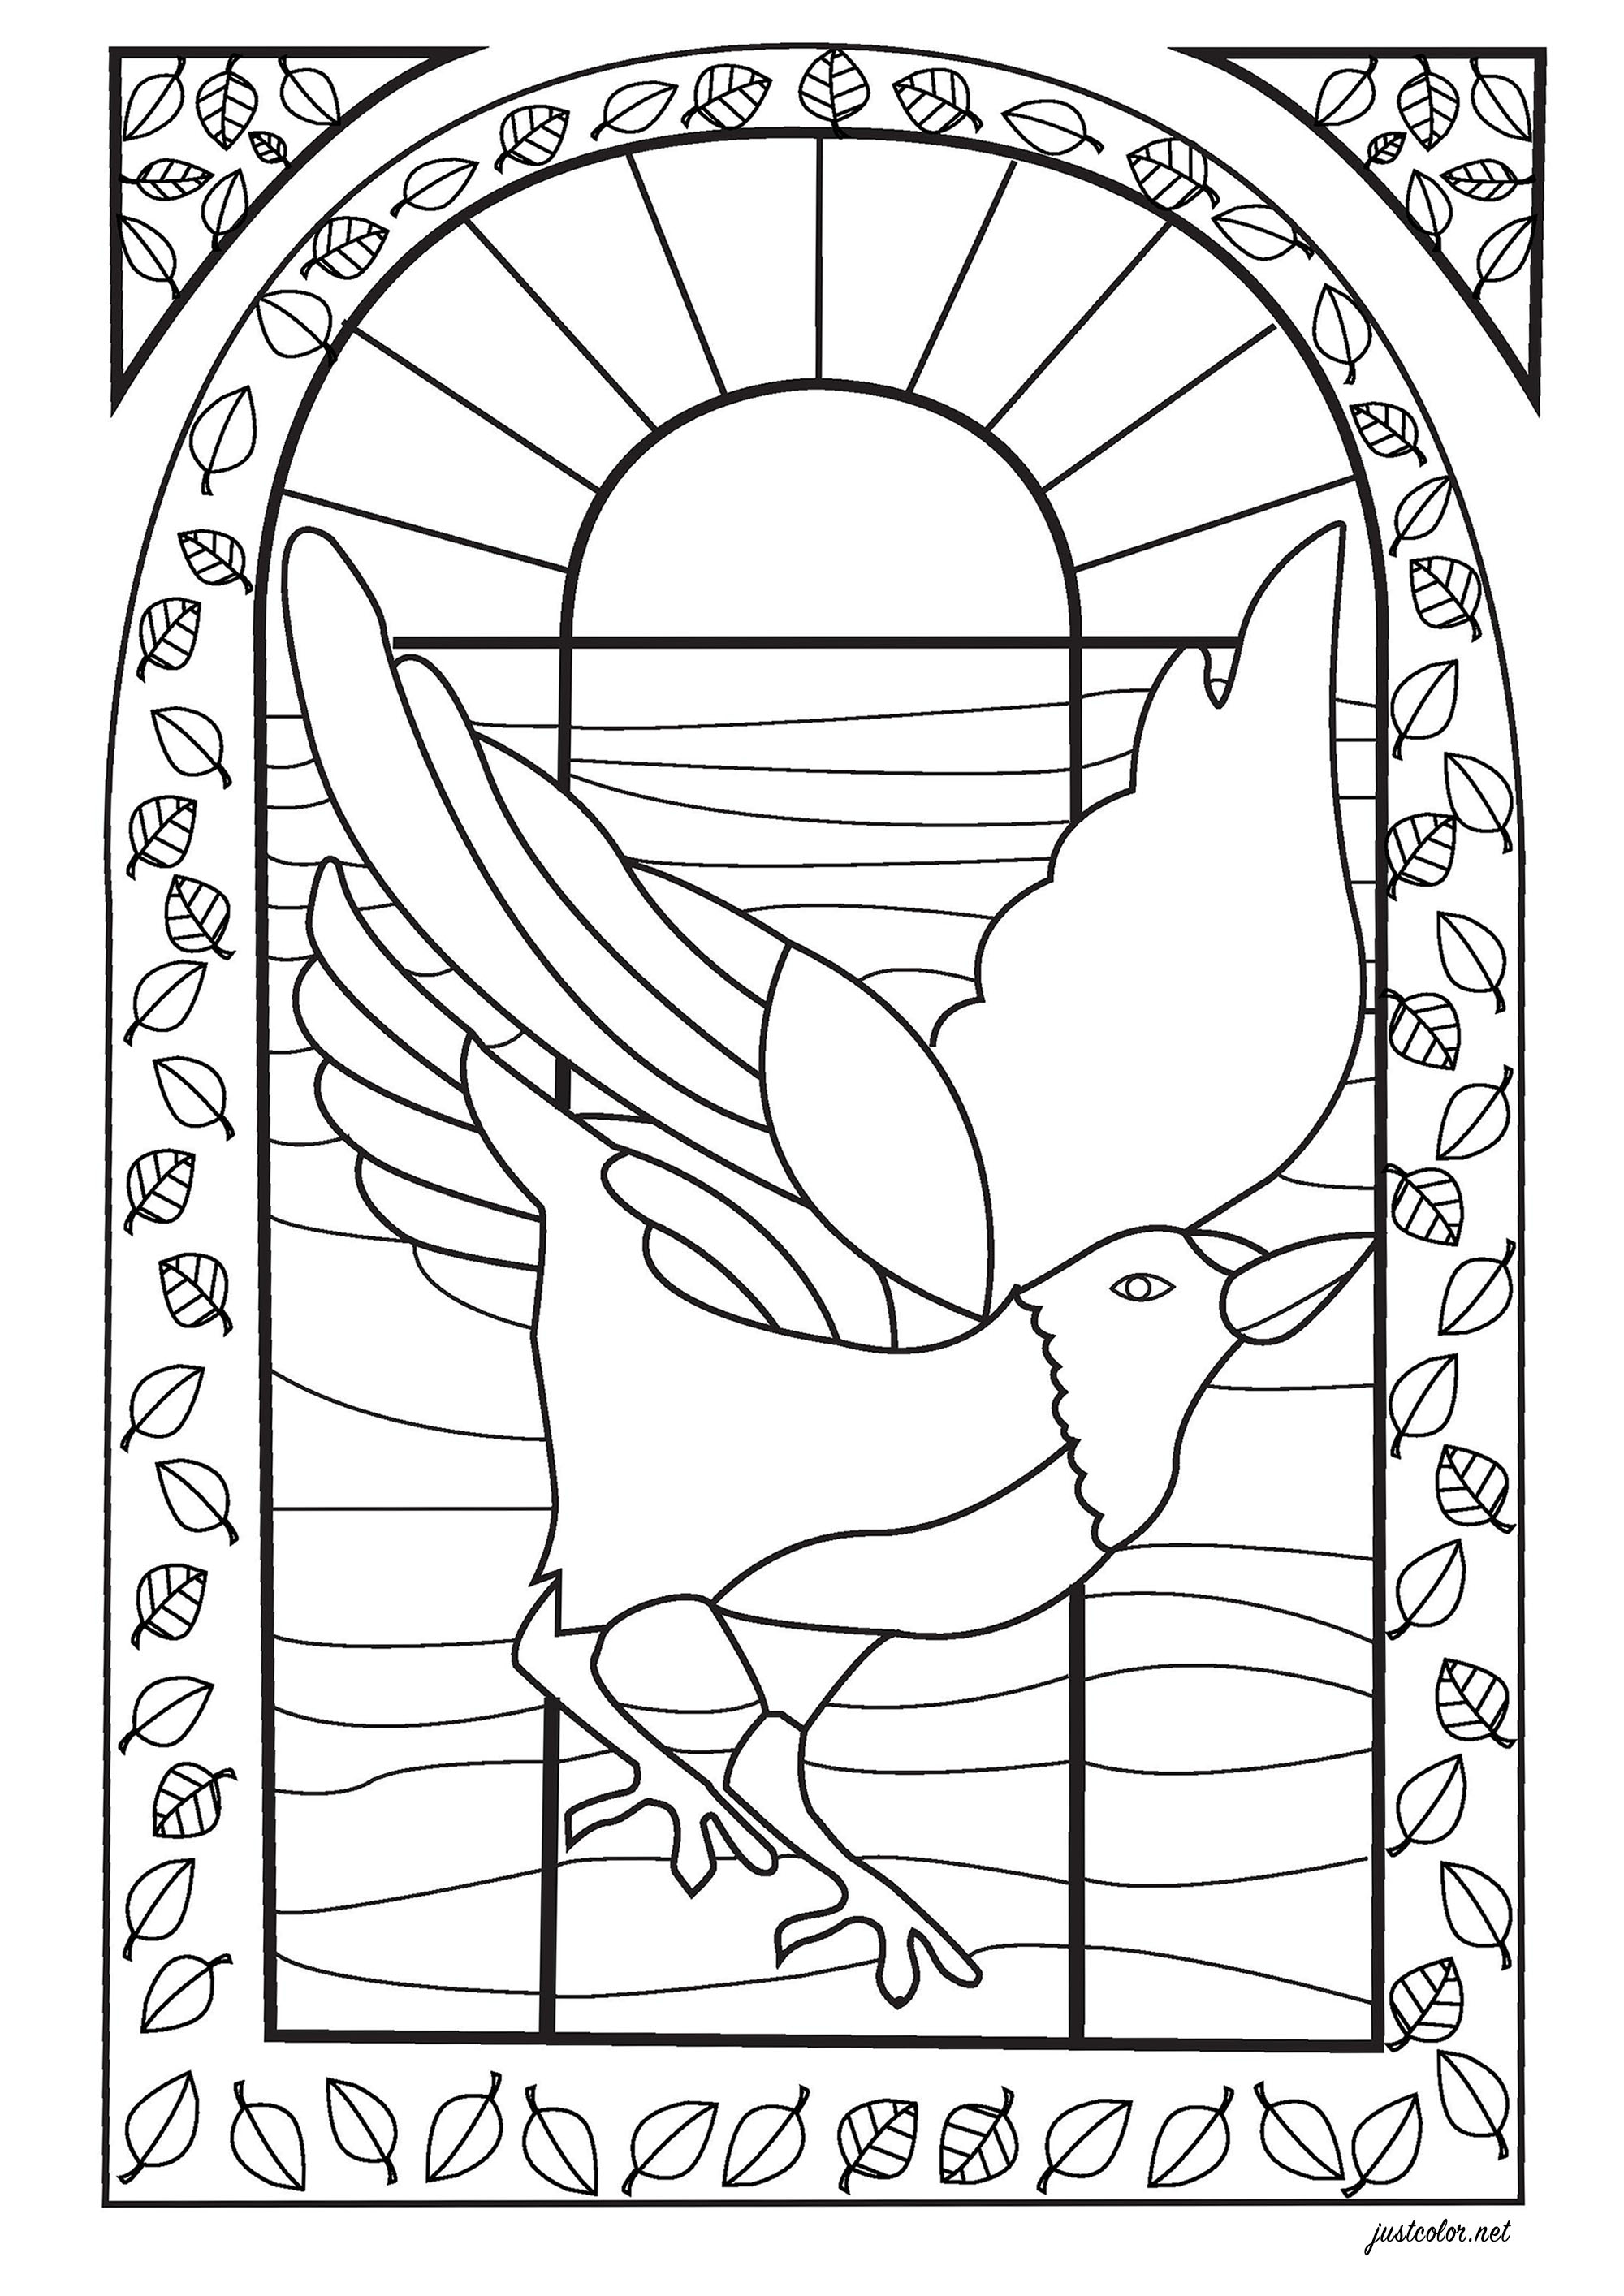 Drawing of a bird to color, drawn in the style of a stained glass window